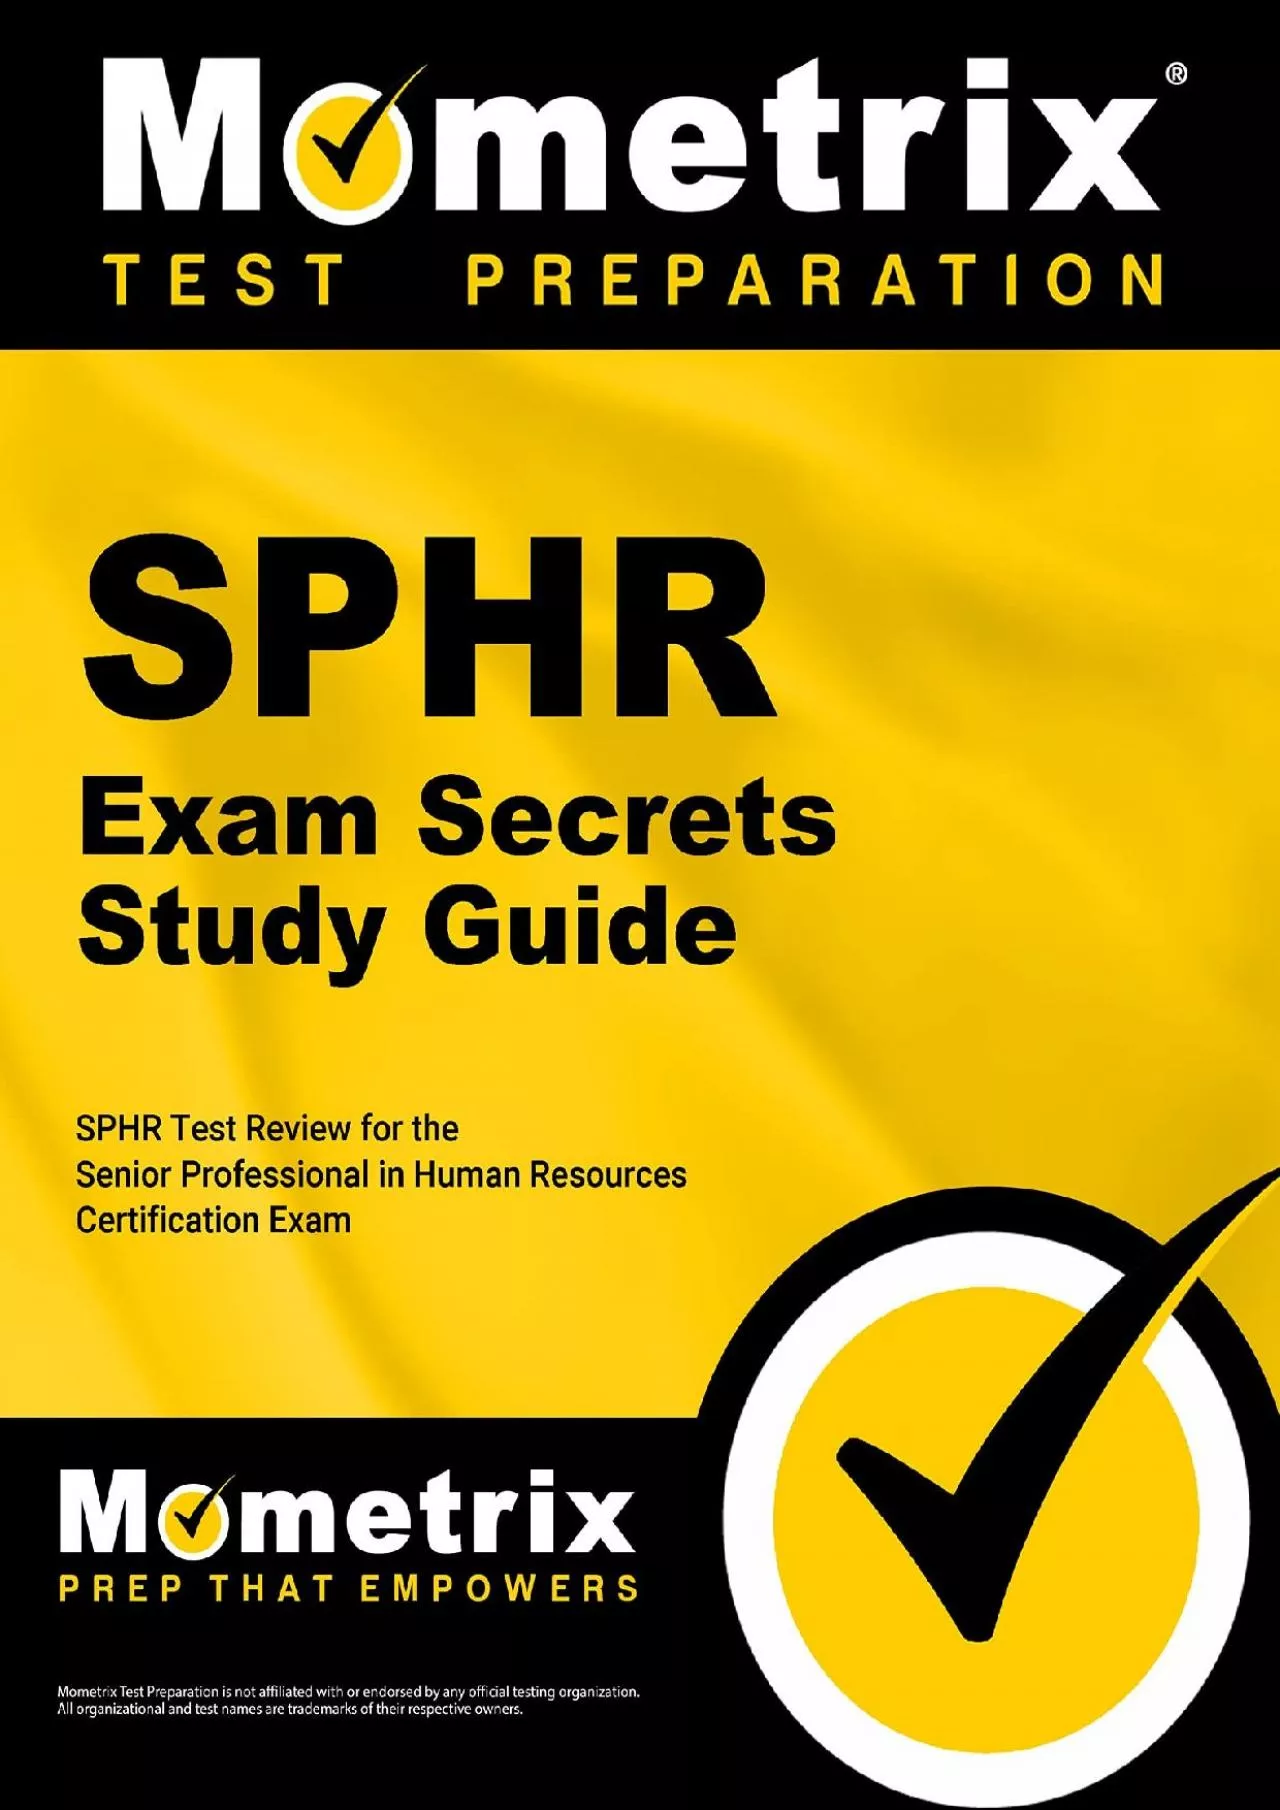 [DOWNLOAD] SPHR Exam Secrets Study Guide: SPHR Test Review for the Senior Professional